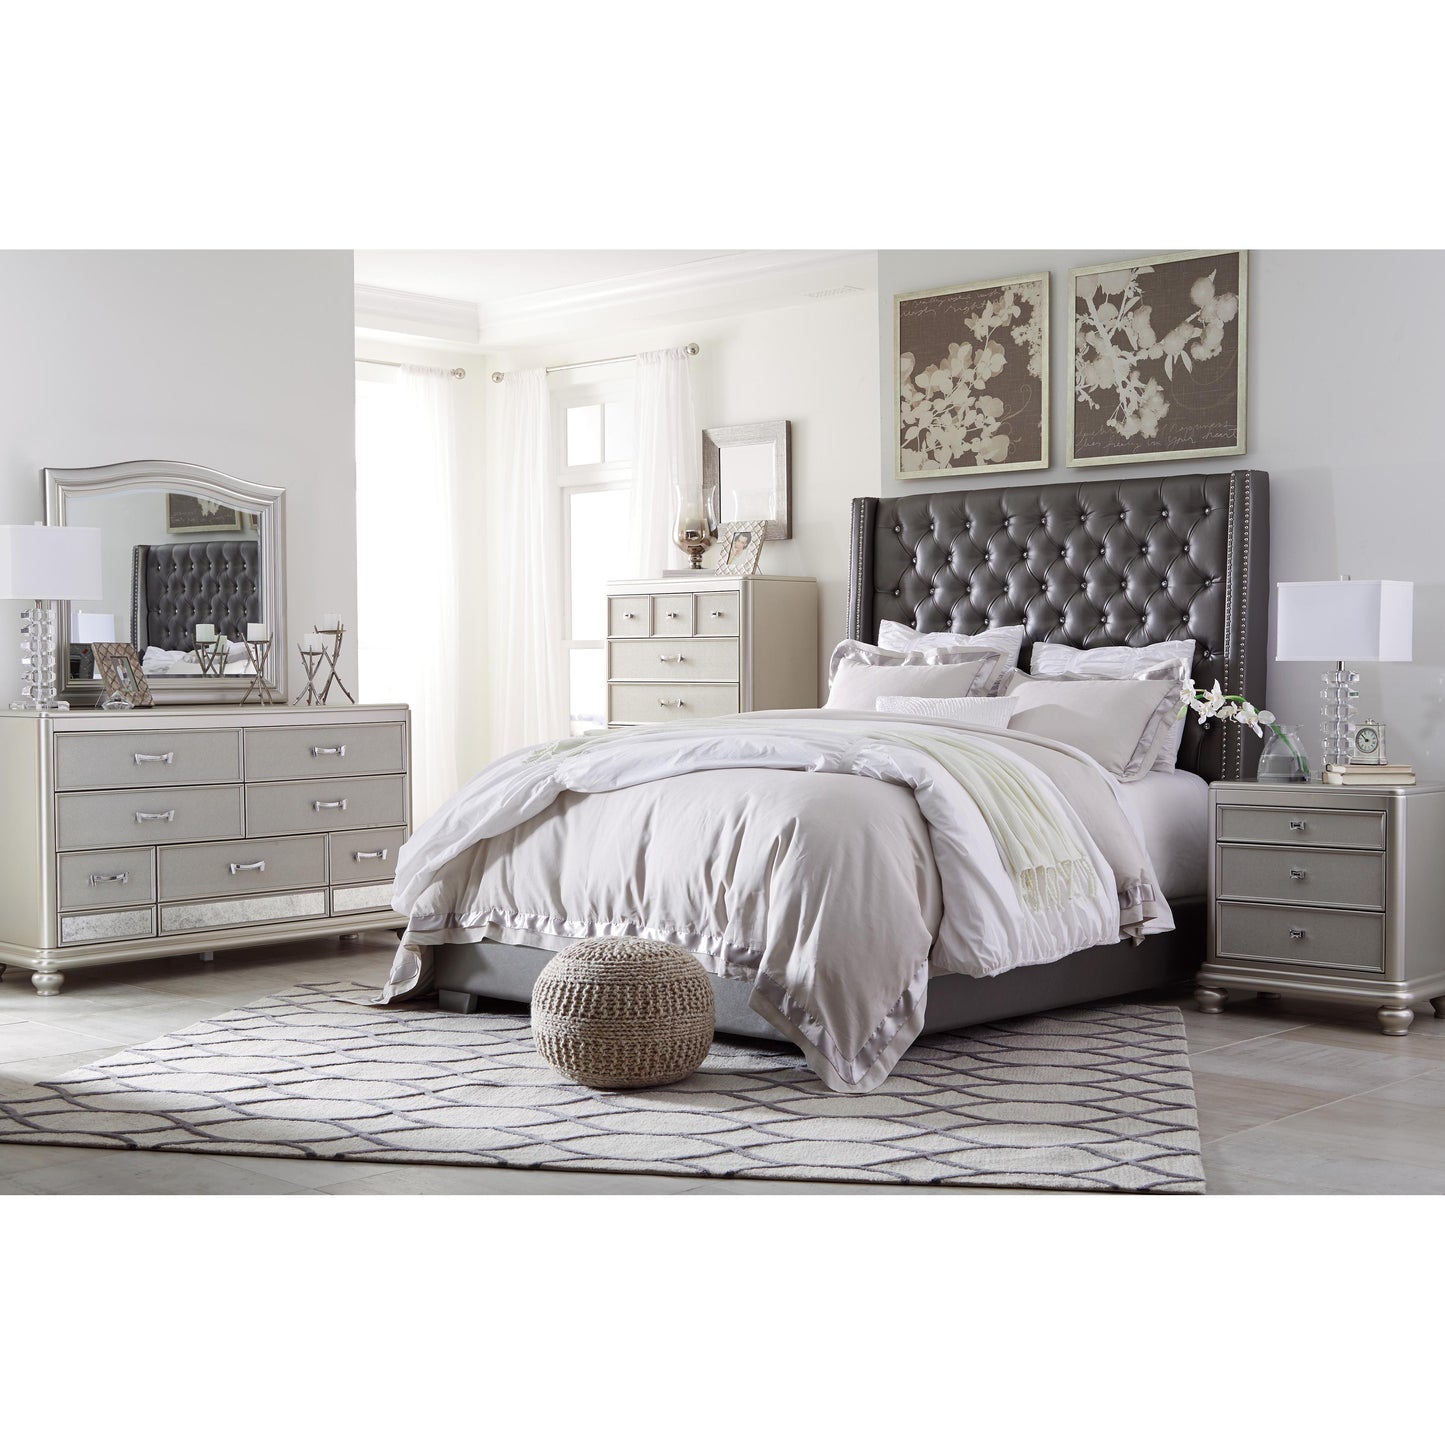 Signature Design by Ashley Coralayne B650B32 7 pc Queen Upholstered Bedroom Set IMAGE 1